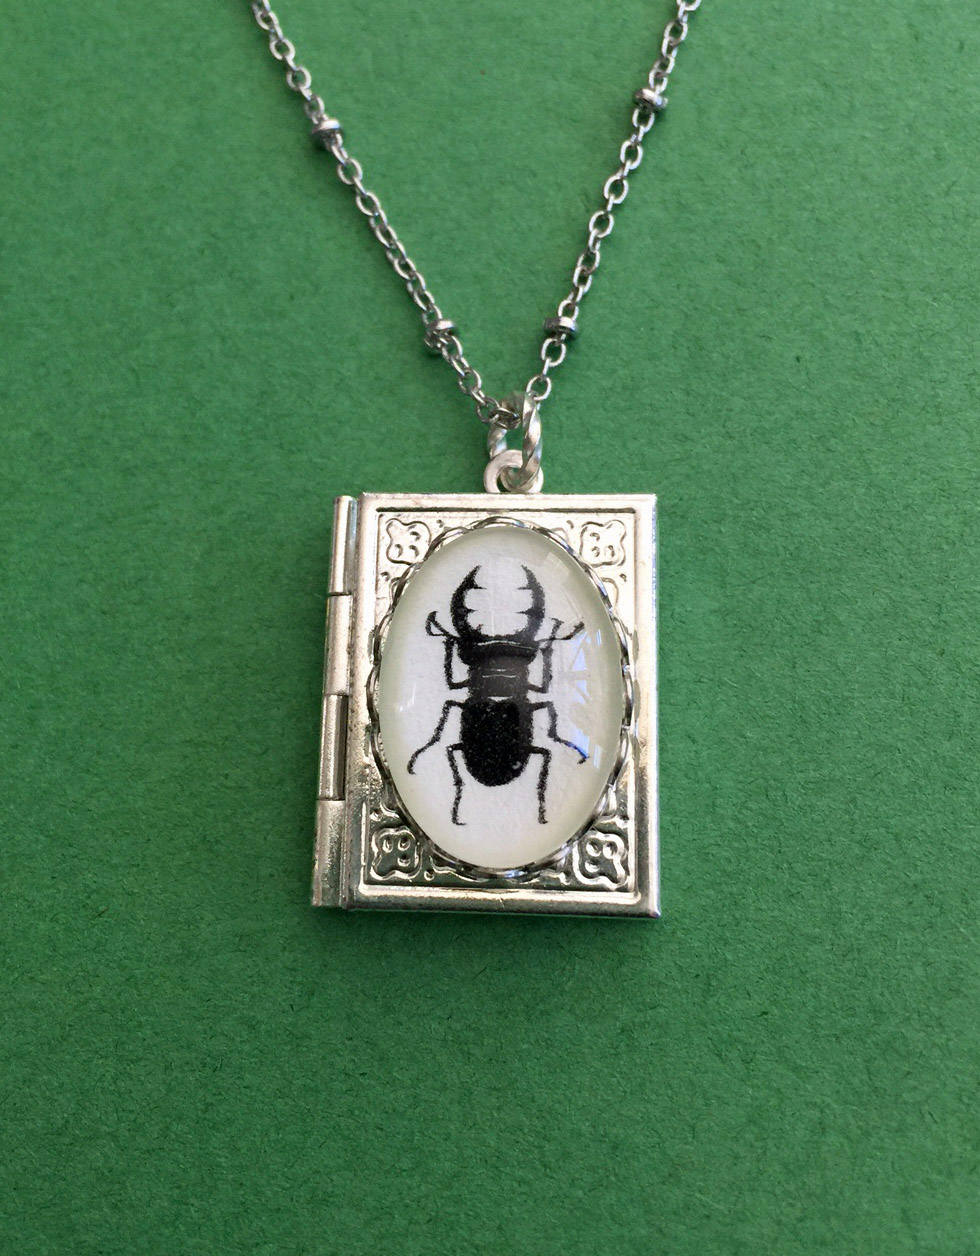 STAG BEETLE Book Locket Necklace, pendant on chain - Silhouette Jewelry